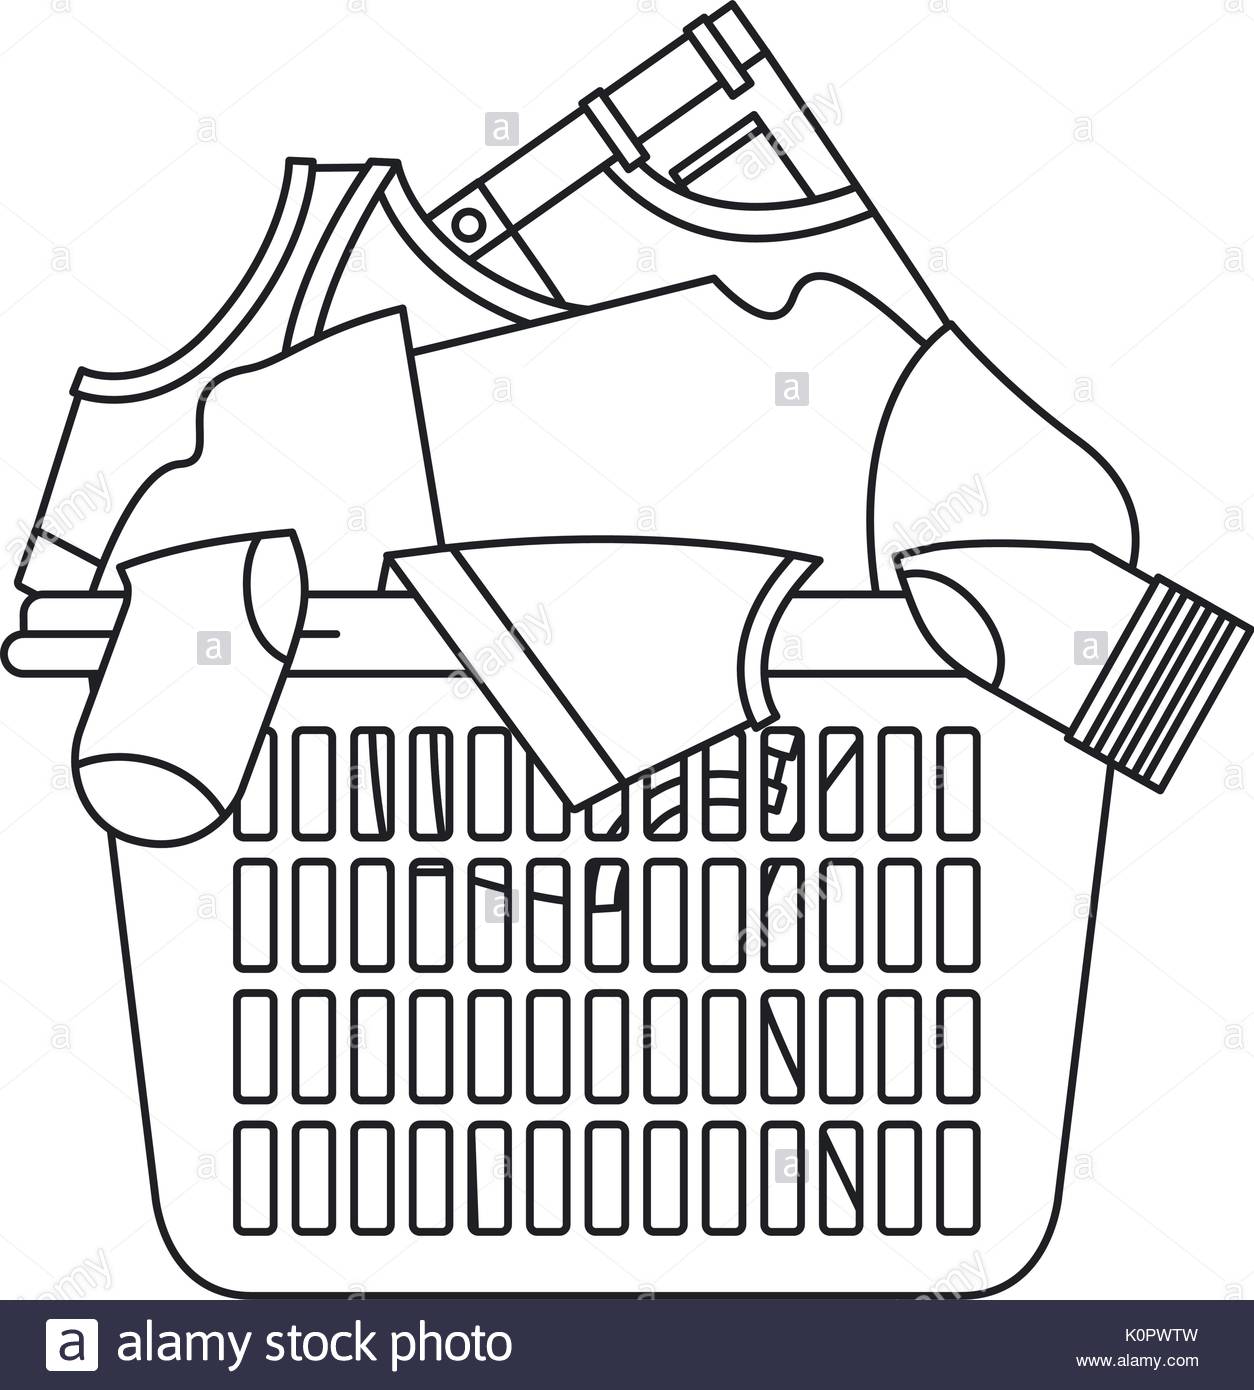 Laundry Basket Drawing at GetDrawings Free download